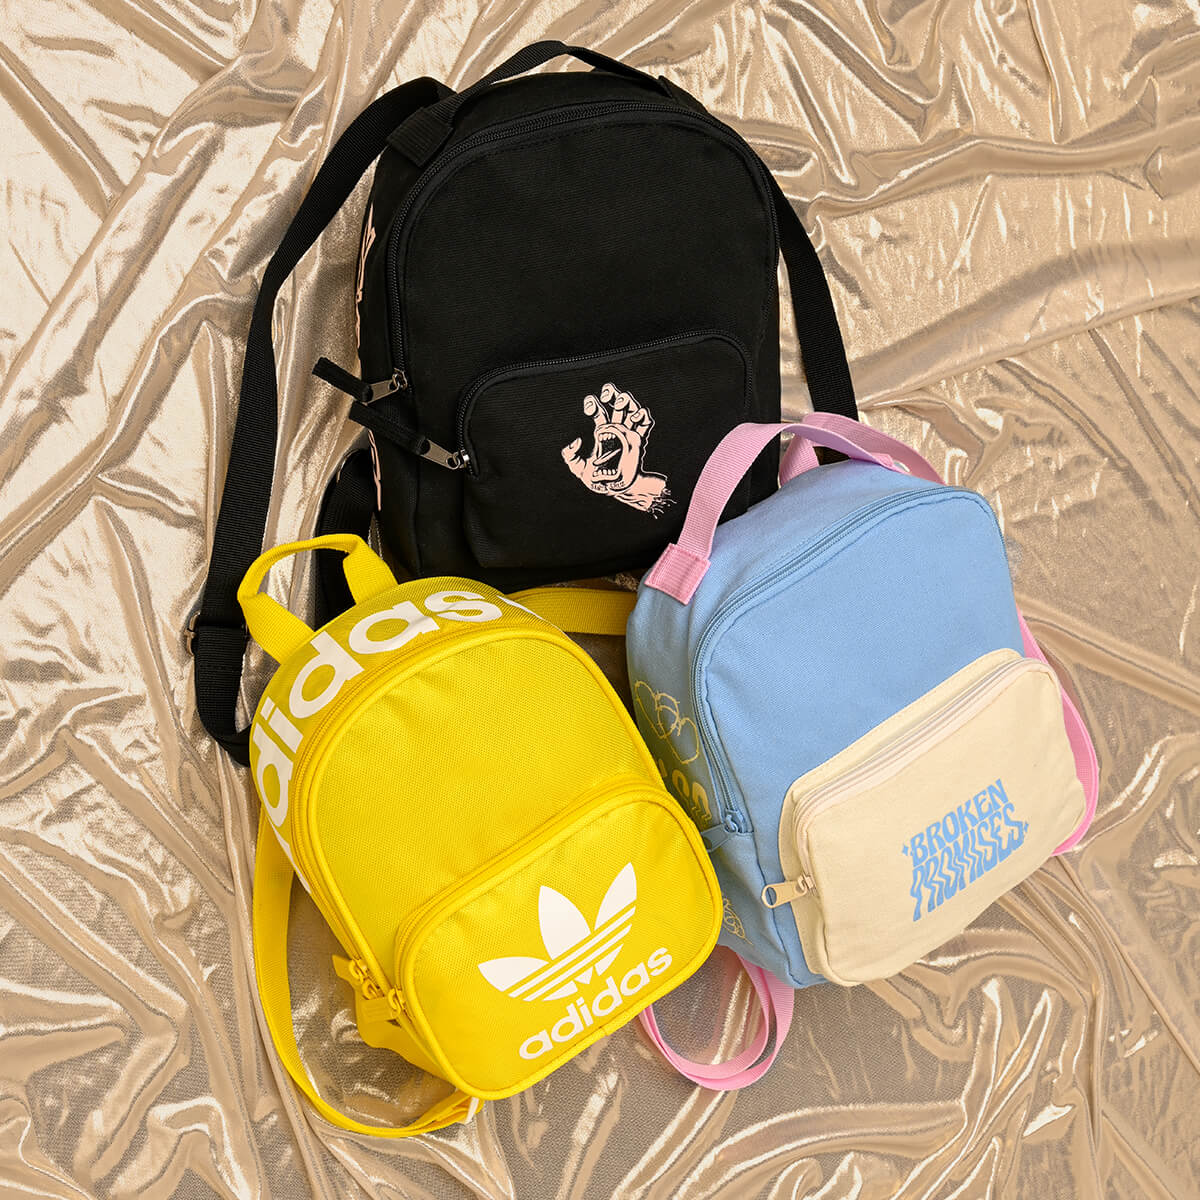 WOMEN'S NEW ARRIVAL BAGS & BACKPACKS - SHOP NOW